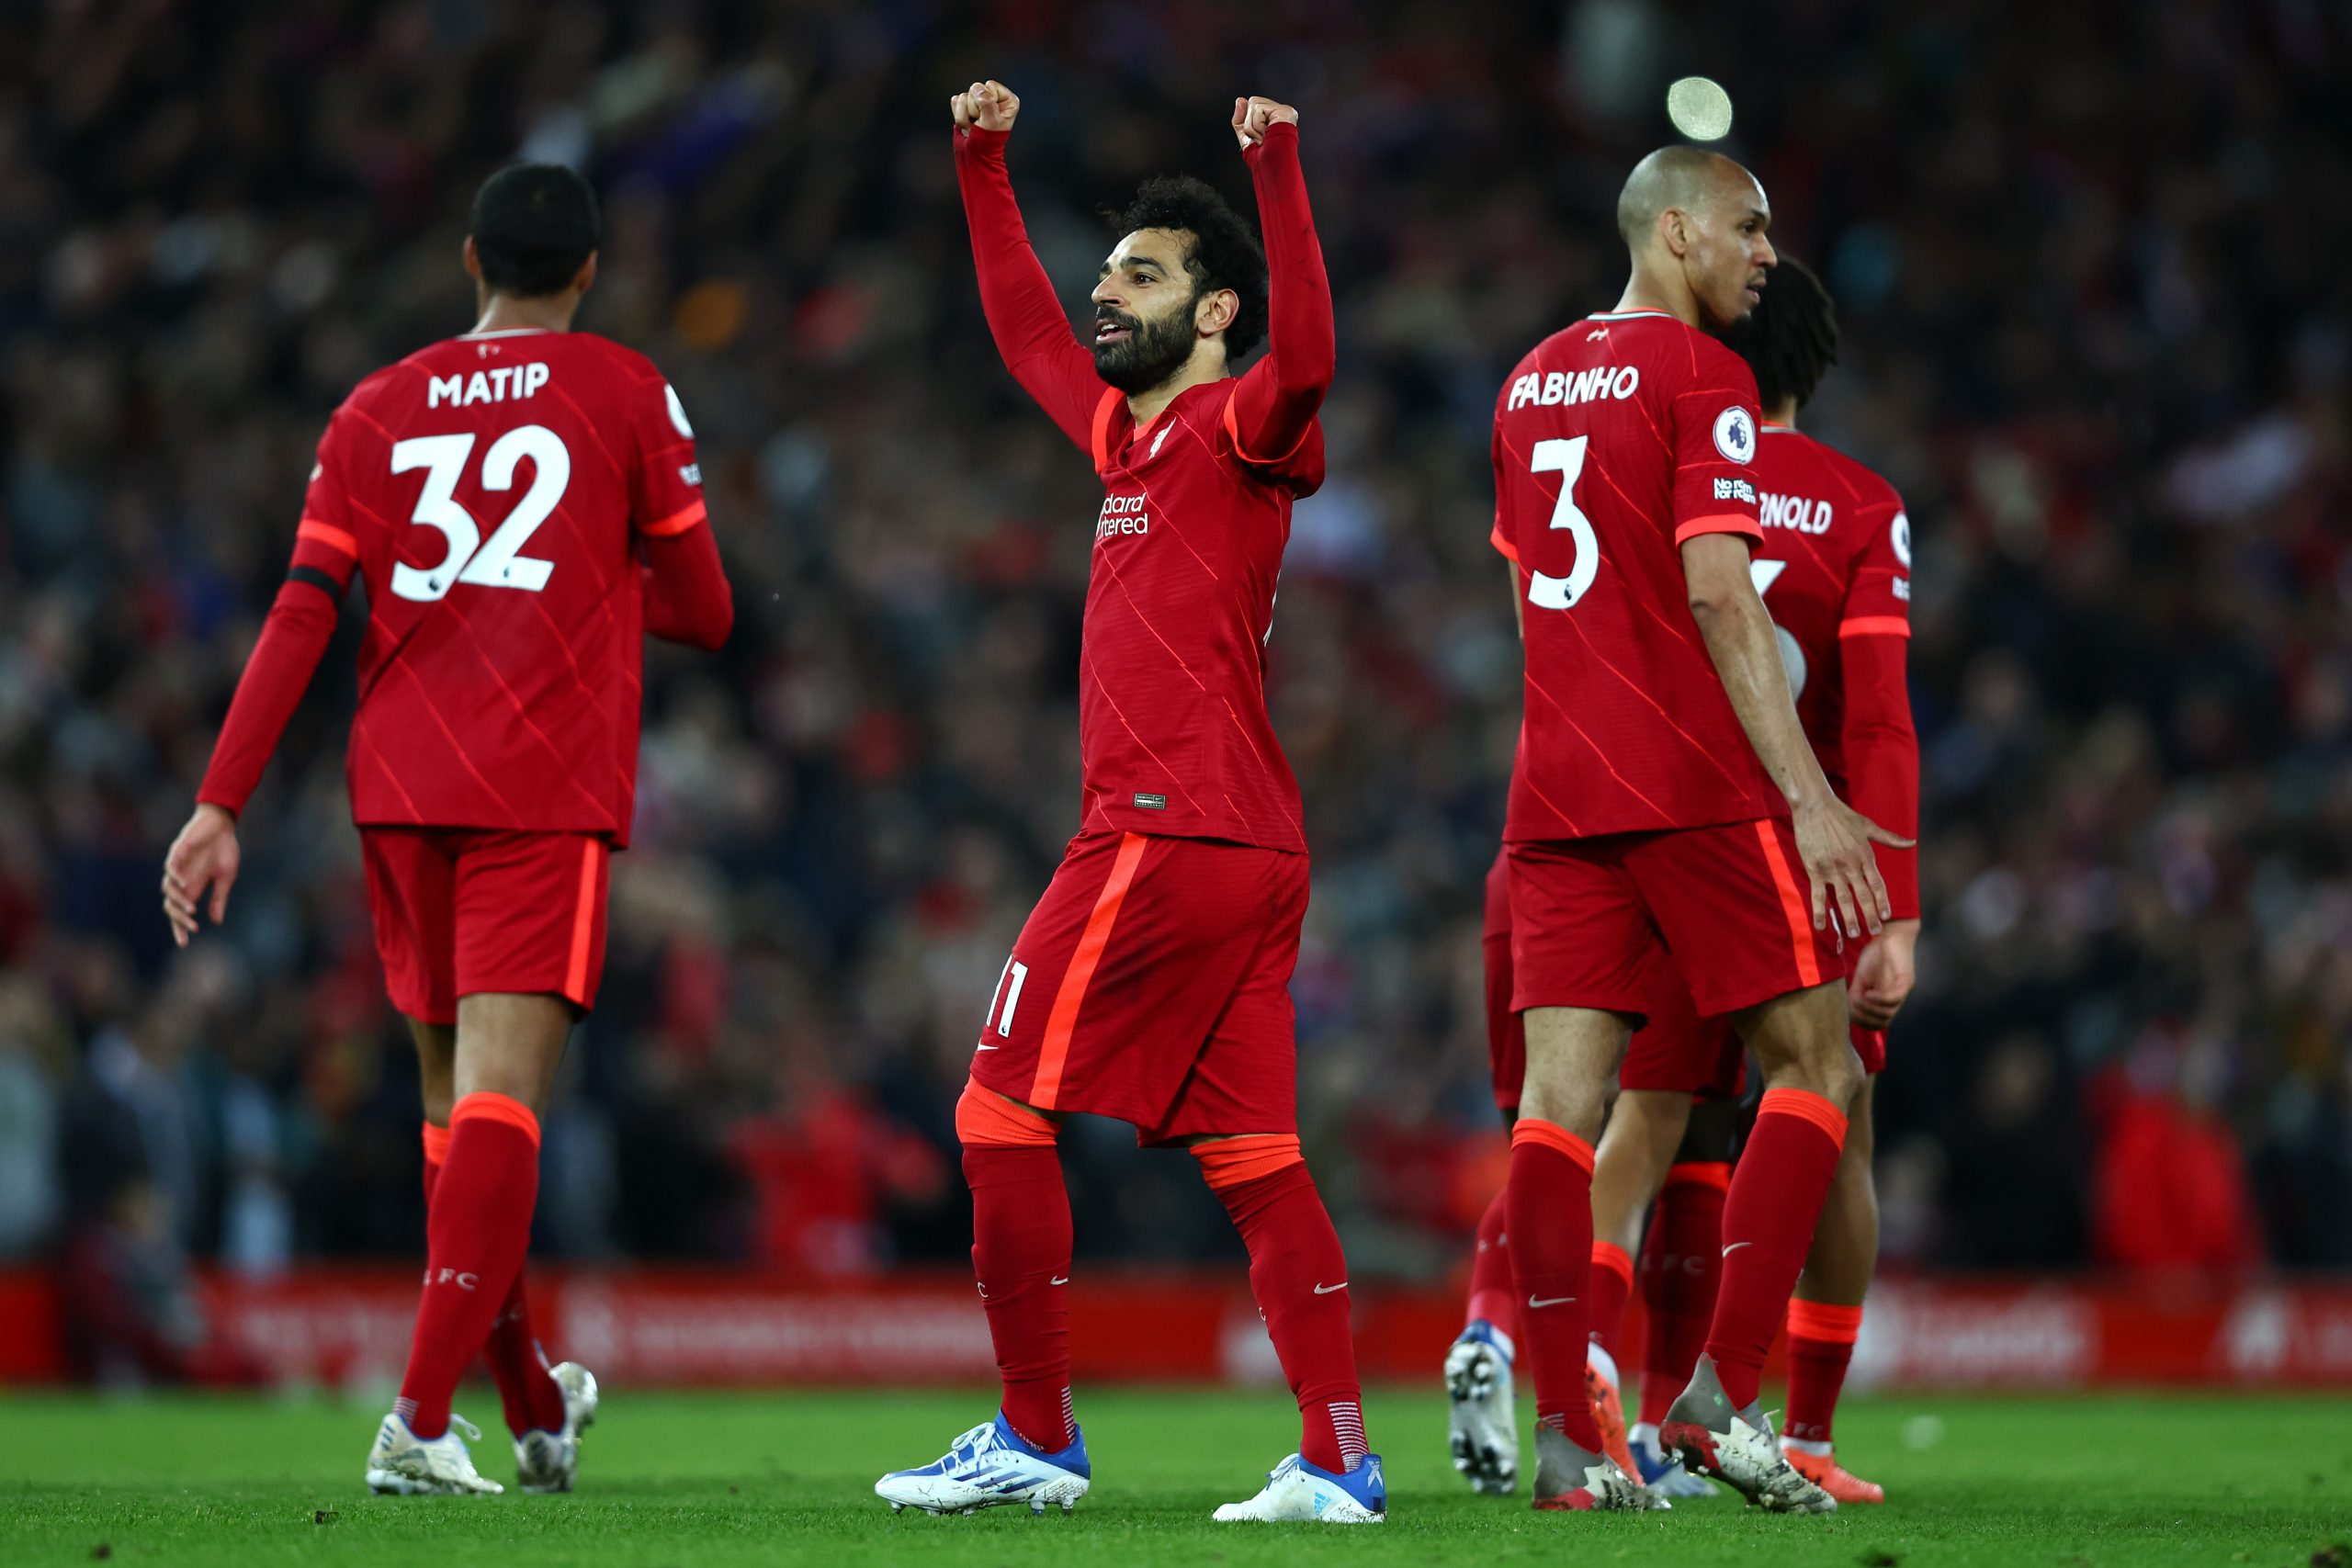 LIVERPOOL, ENGLAND - APRIL 19: Mohamed Salah of Liverpool celebrates scoring their side's fourth goal during the Premier League match between Liverpool and Manchester United at Anfield on April 19, 2022 in Liverpool, England. (Photo by Clive Brunskill/Getty Images)
The 4th Official uses images provided by the following image agency:
Getty Images (https://www.gettyimages.de/)
Imago Images (https://www.imago-images.de/)